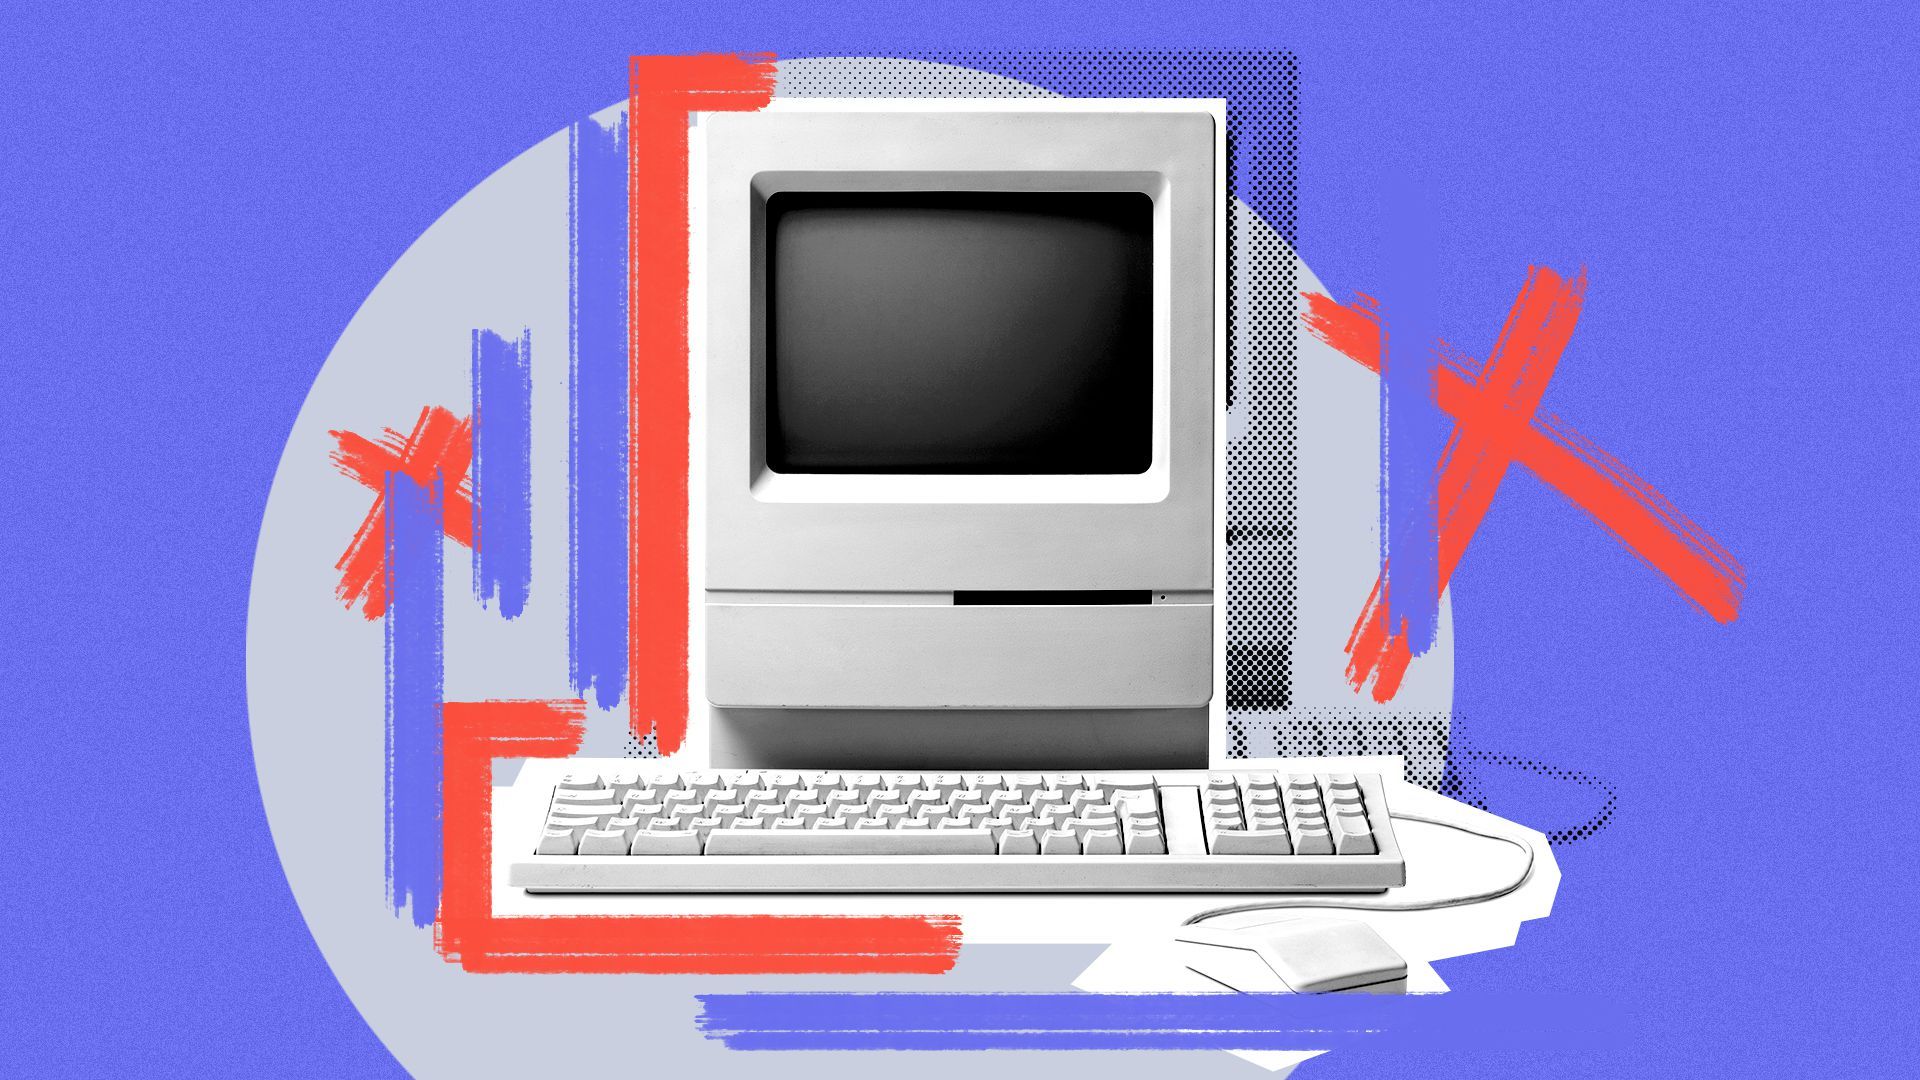 Illustration collage of an old computer monitor surrounded by graphic shapes